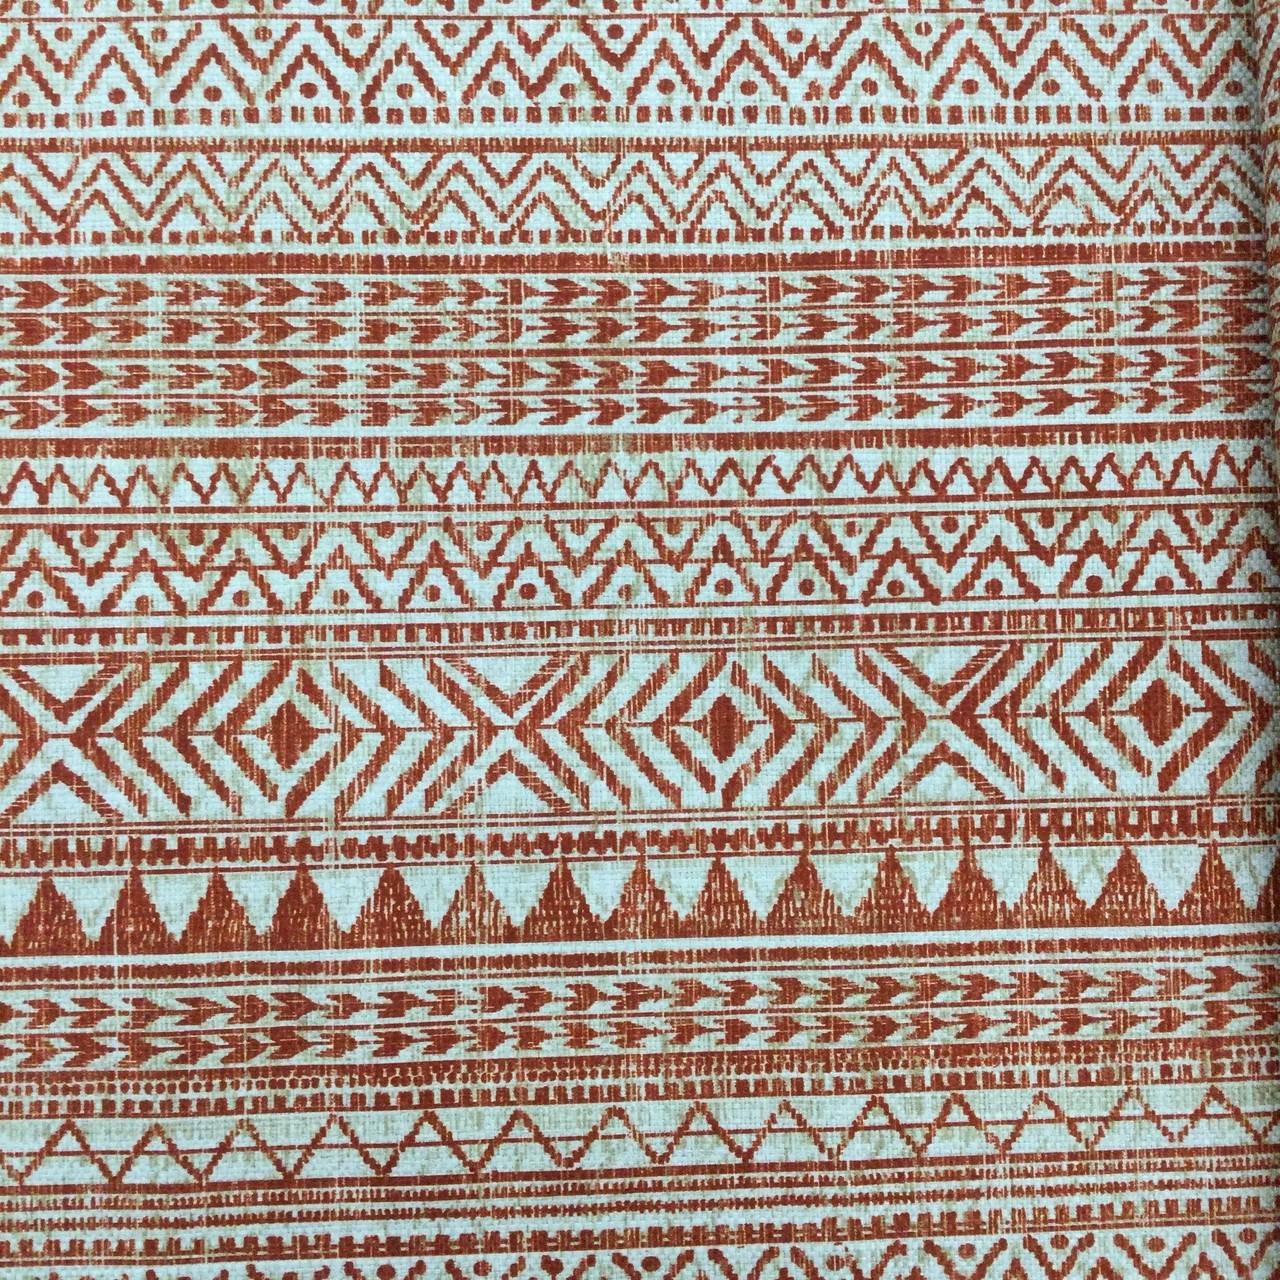 Boho Stripe Fabric by The Yard Bohemian Mandala Indoor Outdoor Fabric Chic  Boho Upholstery Fabric for Chairs Geometric Aztec Decorative Fabric for